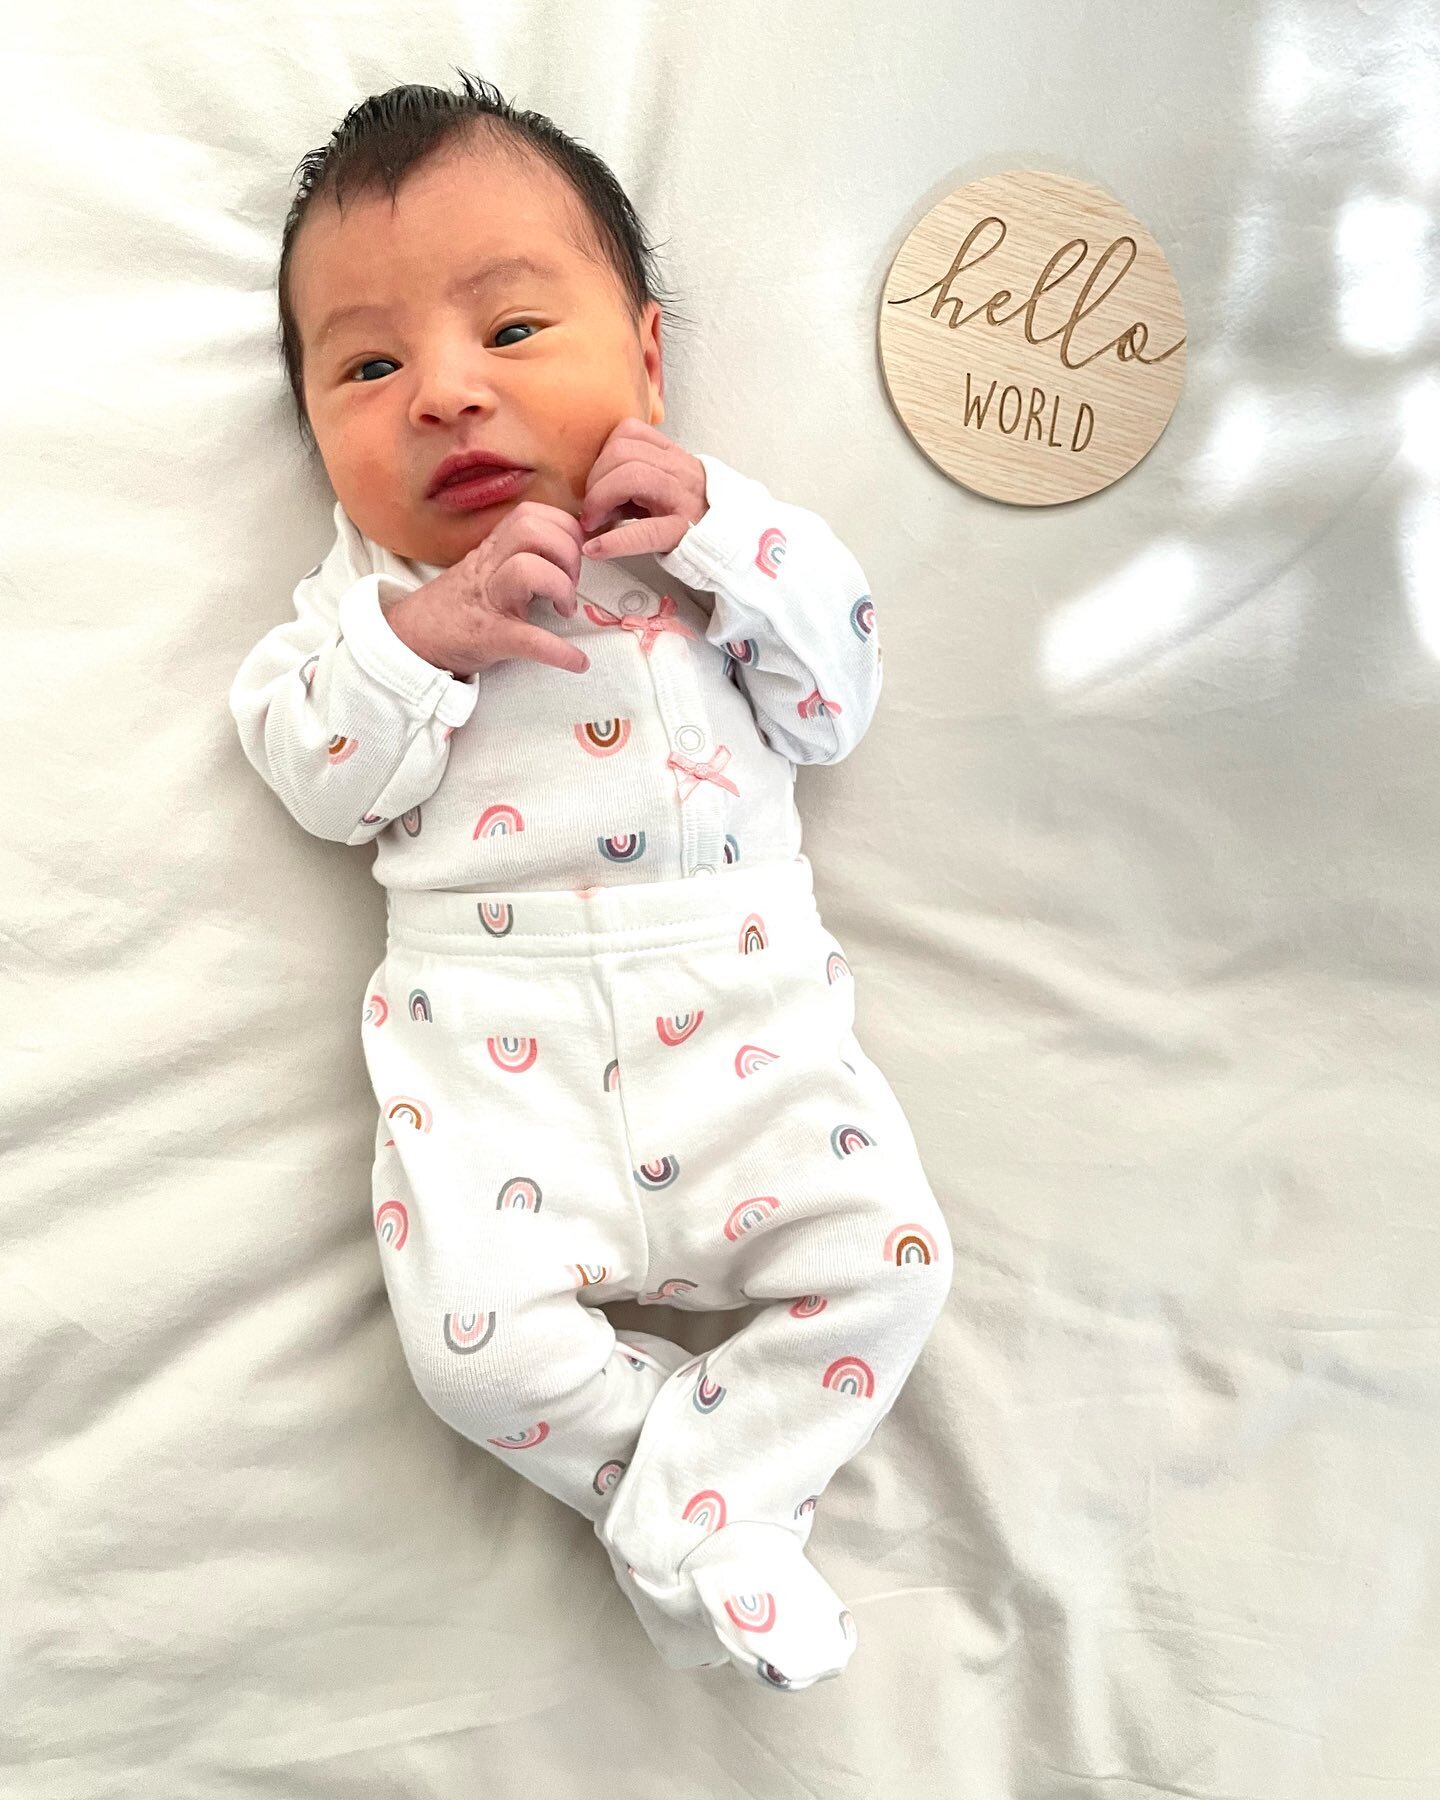 On February 17, 2022 we welcomed our sweet baby girl Jordyn Jade Miller into the world 🌎💫.

We are overwhelmed with love and amazement for our little one 🐯 I feel very blessed and grateful to be her mommy. Words cannot fully express how special he